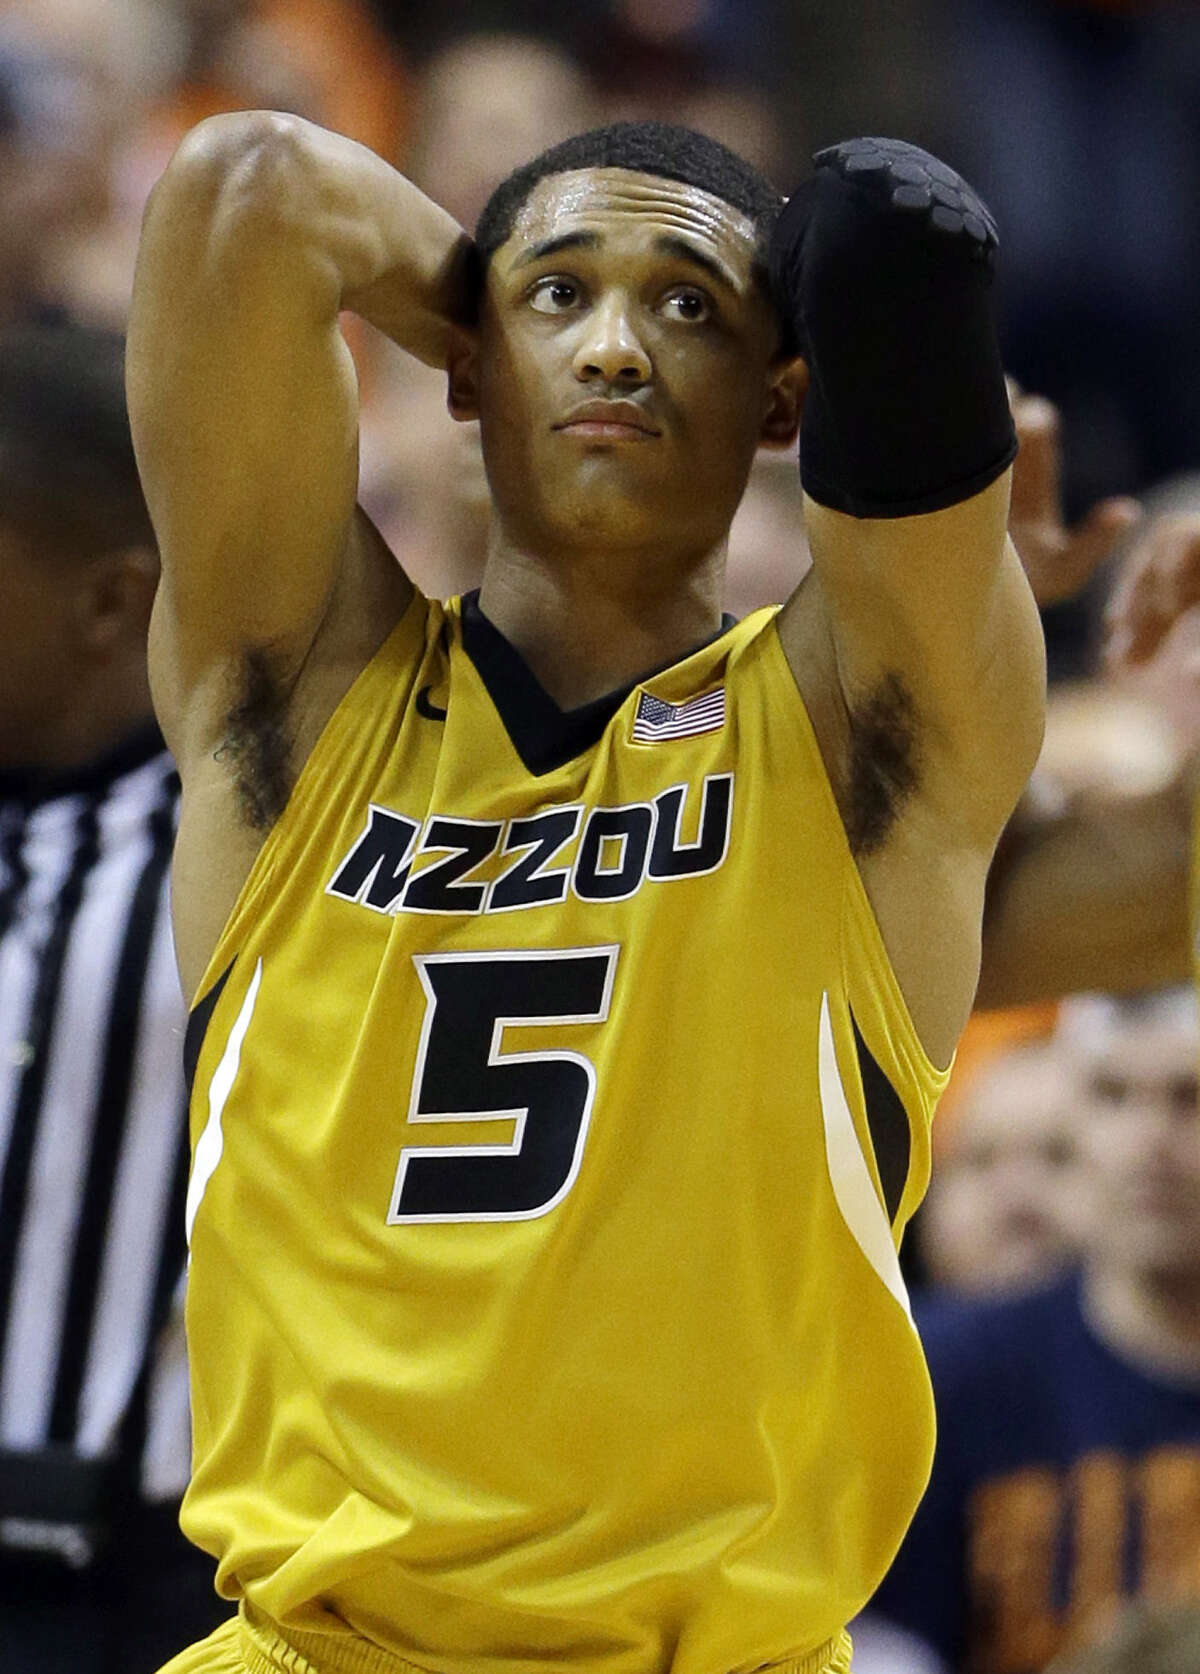 Missouri's Jordan Clarkson, a Wagner grad, reacts to a call in the No. 23 Tigers' loss to Illinois on Saturday. Clarkson paced Missouri with 25 points.